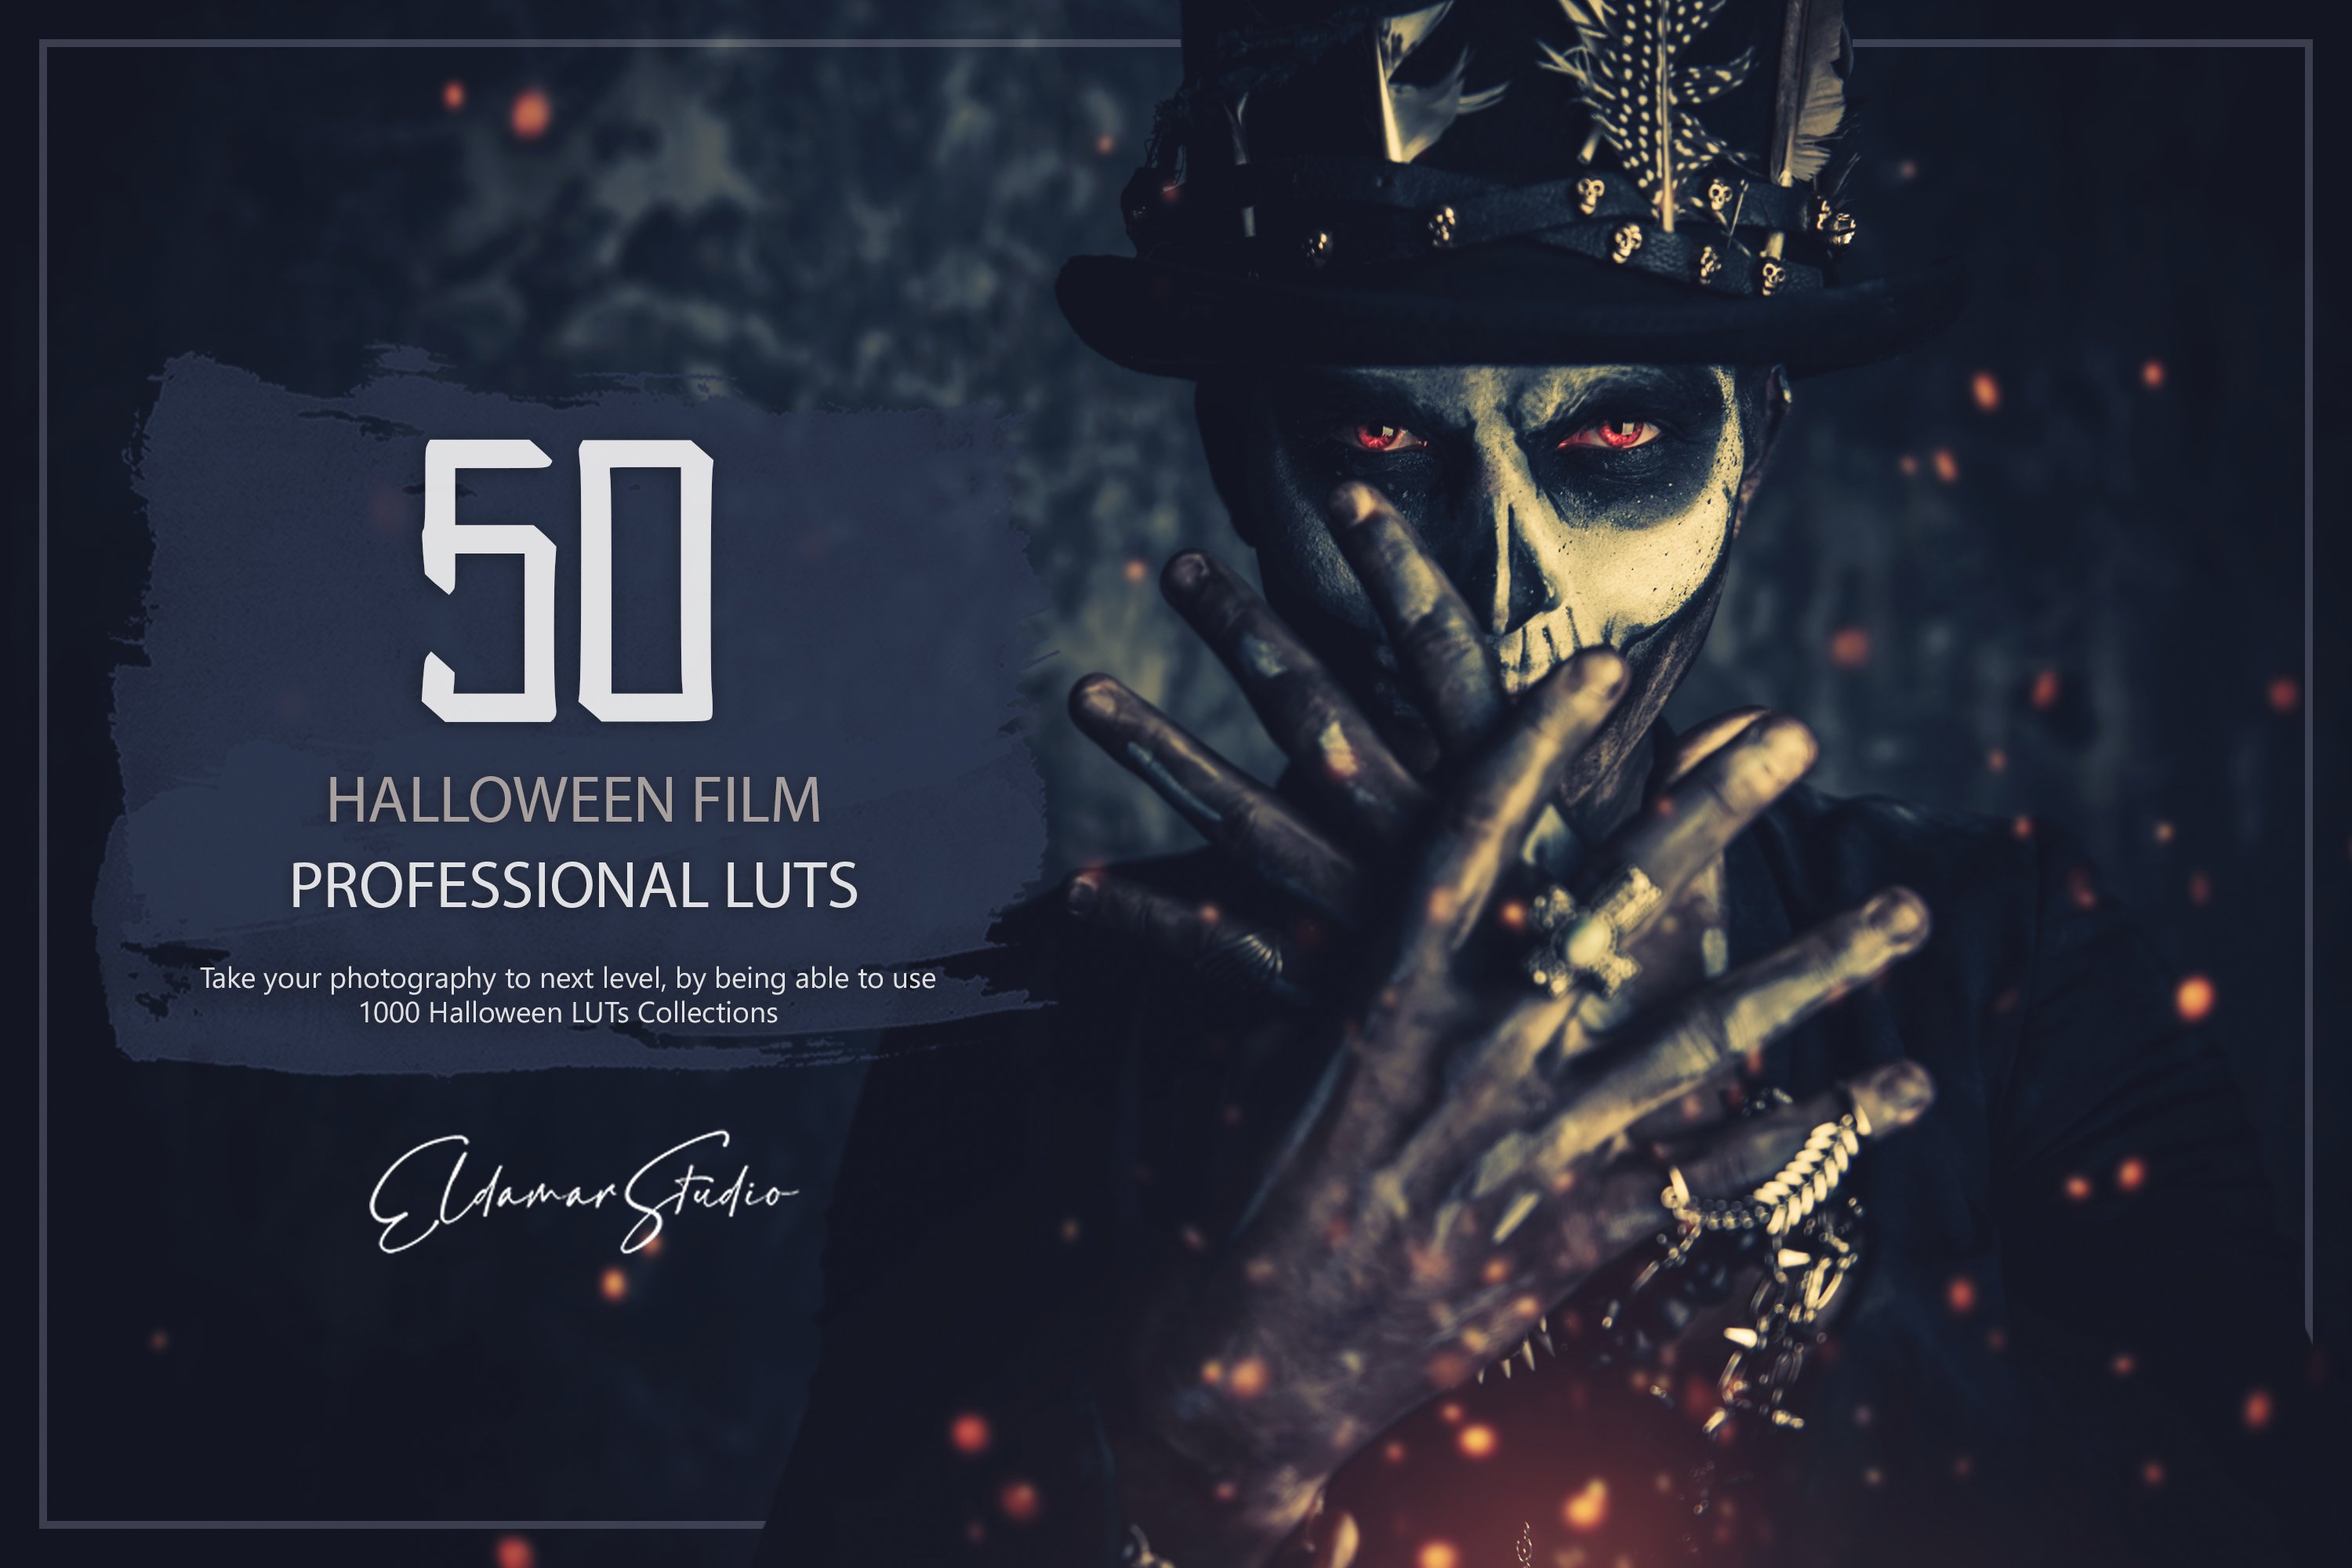 50 Halloween Film LUTs and Presetscover image.